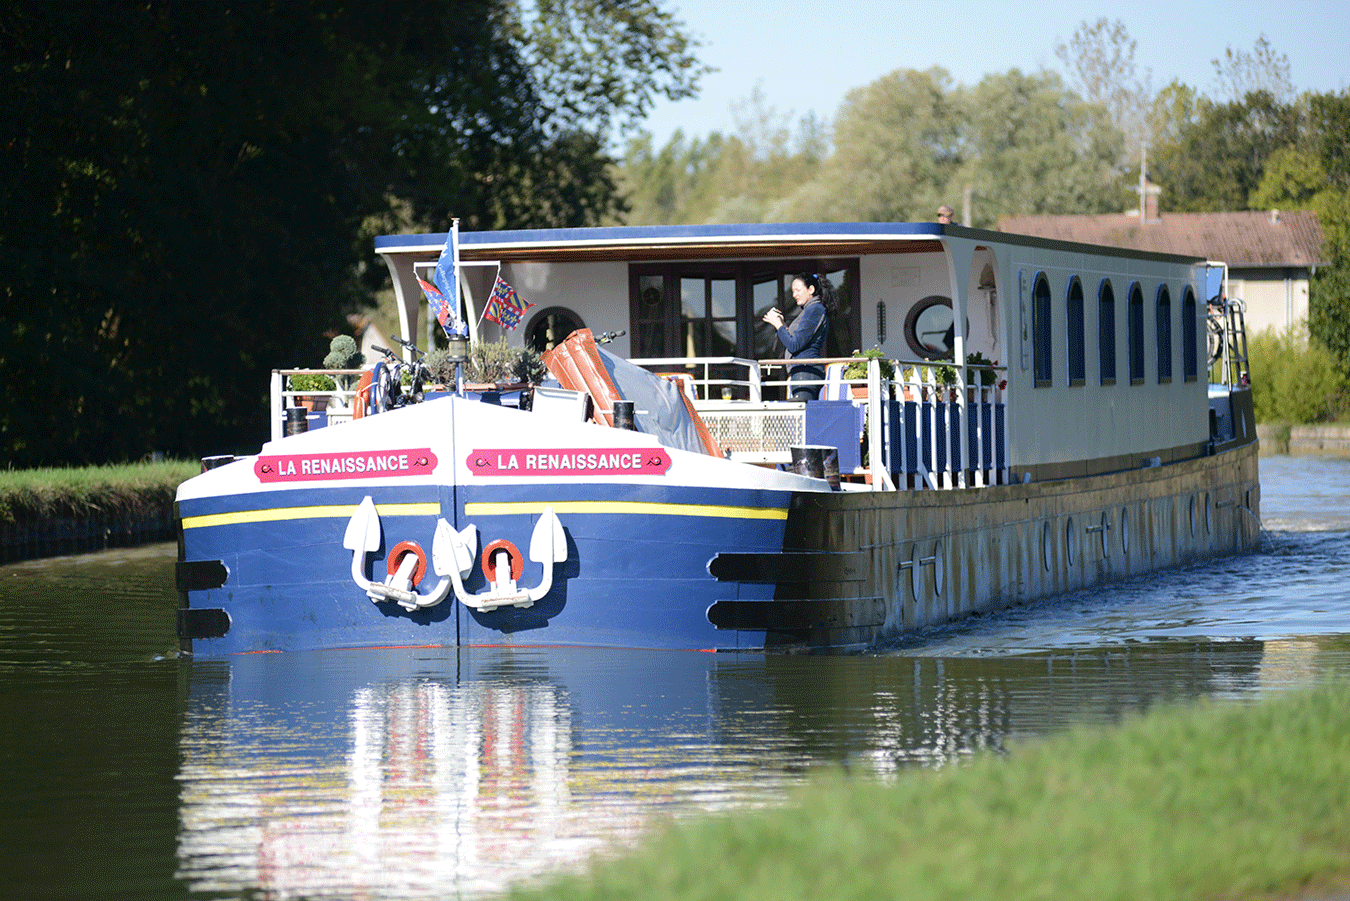 The small hotel barges of European Waterways allow their ships to explore rivers and canals that are often inaccessible to larger vessels.